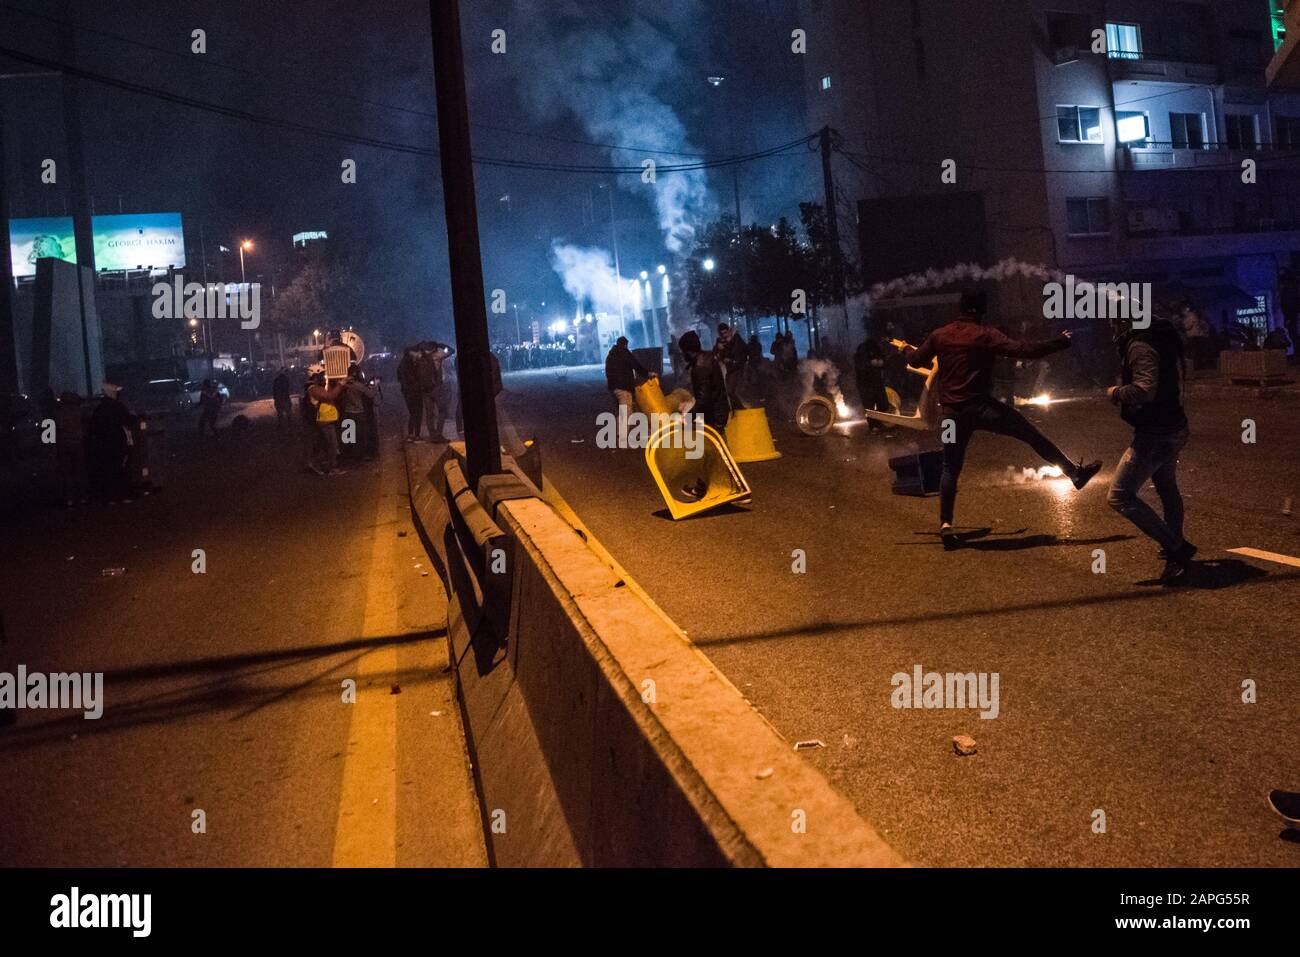 Beirut, Lebanon. 22nd Jan, 2020. Tear gas hits protesters building a roadblock following Hassan Diab's finalisation of a new cabinet for Lebanon, riots broke out in the capital. Credit: Elizabeth Fitt/Alamy Live News Stock Photo